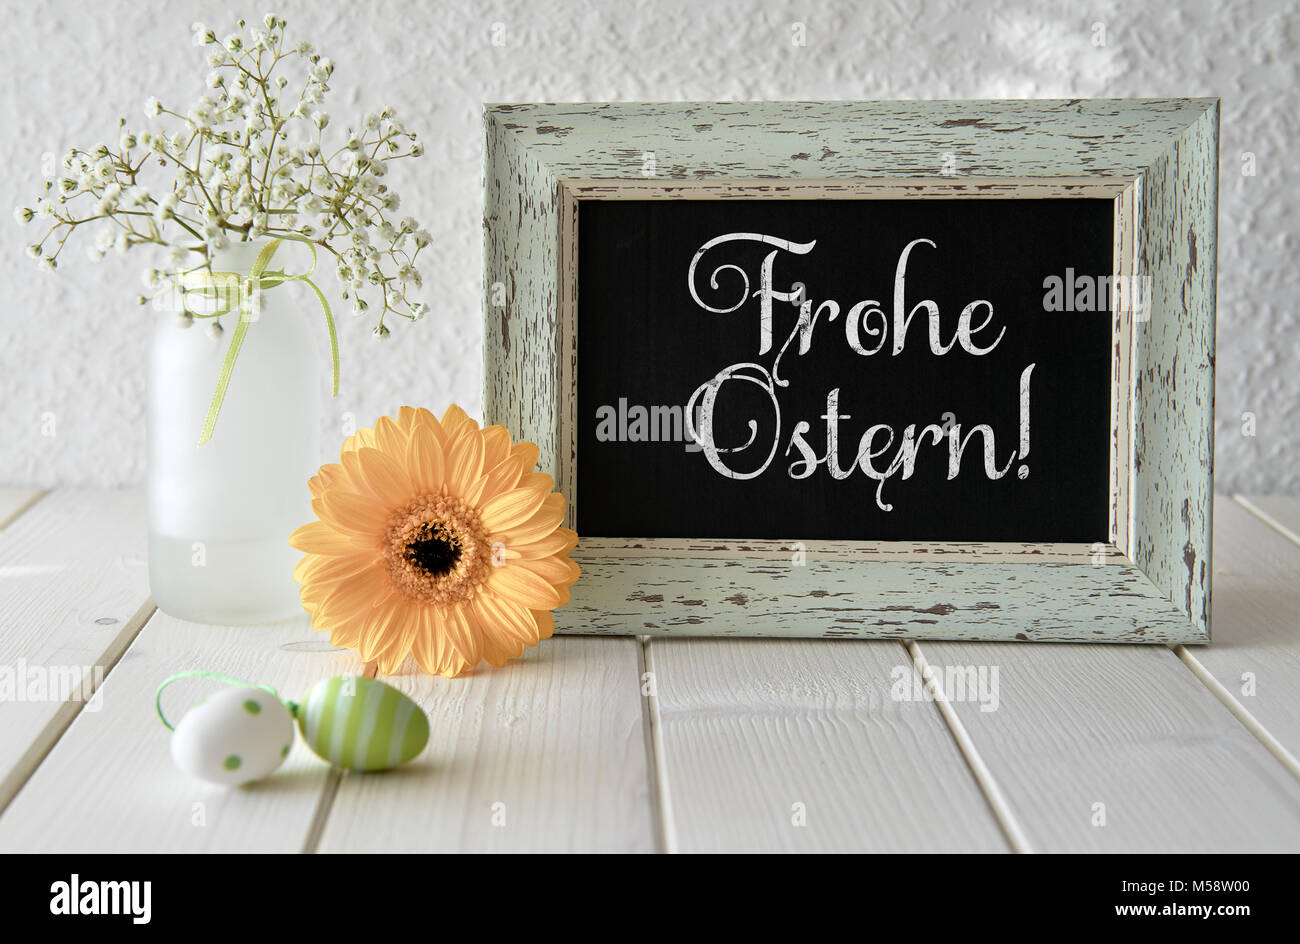 Spring flowers, Easter decorations and a blackboard on white table. Text 'Frohe Ostern', that means 'Happy Easter!' in English on a blackboard. Stock Photo